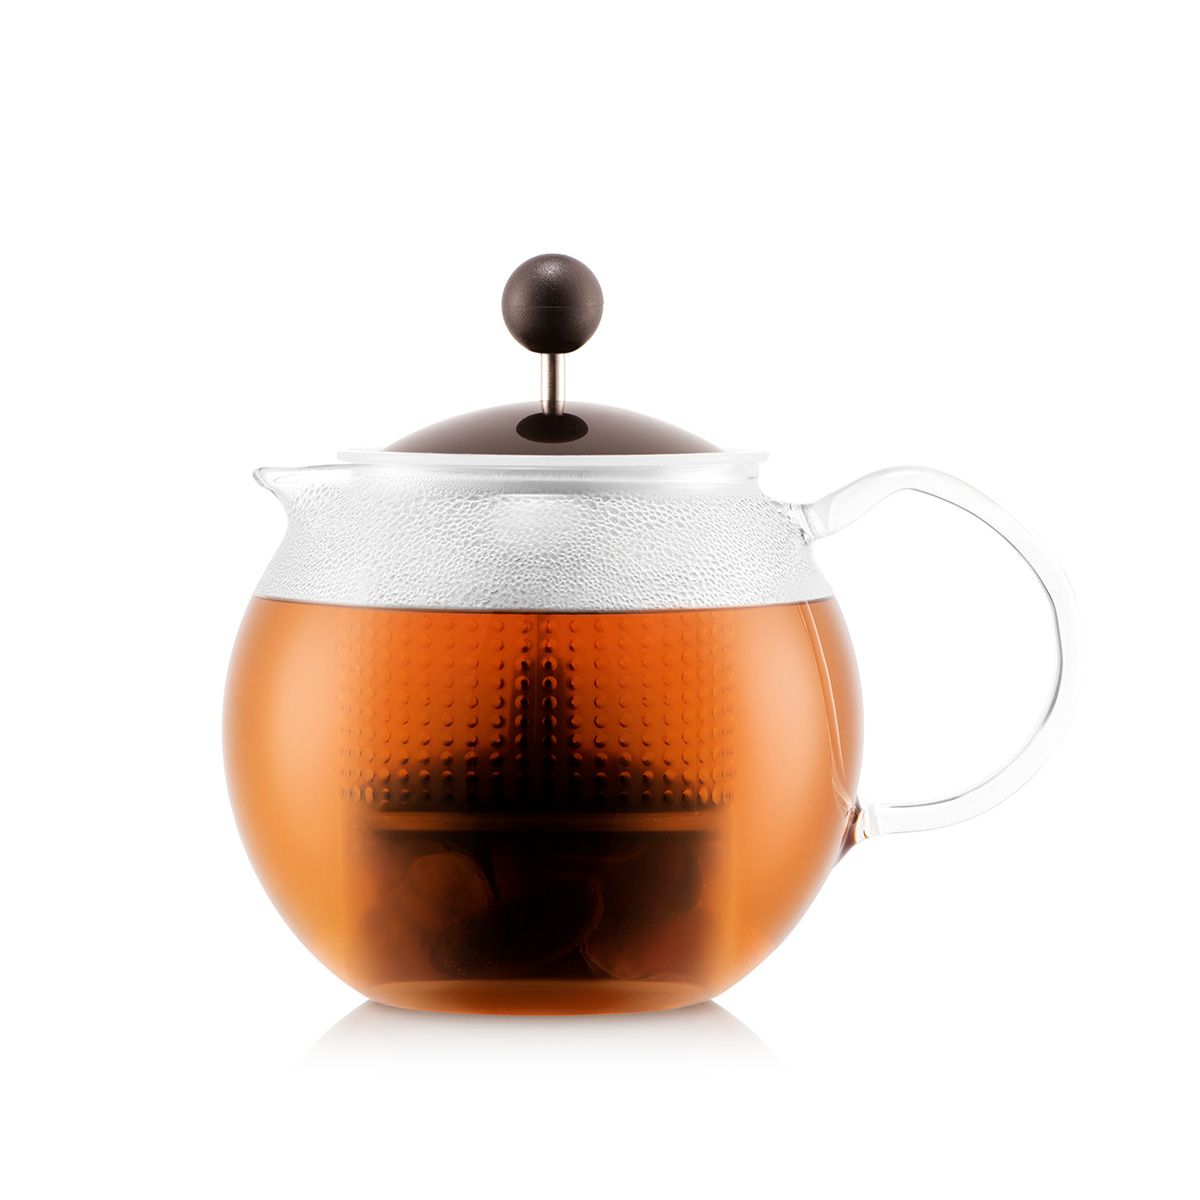 what types of tea are best suited for the bodum tea press